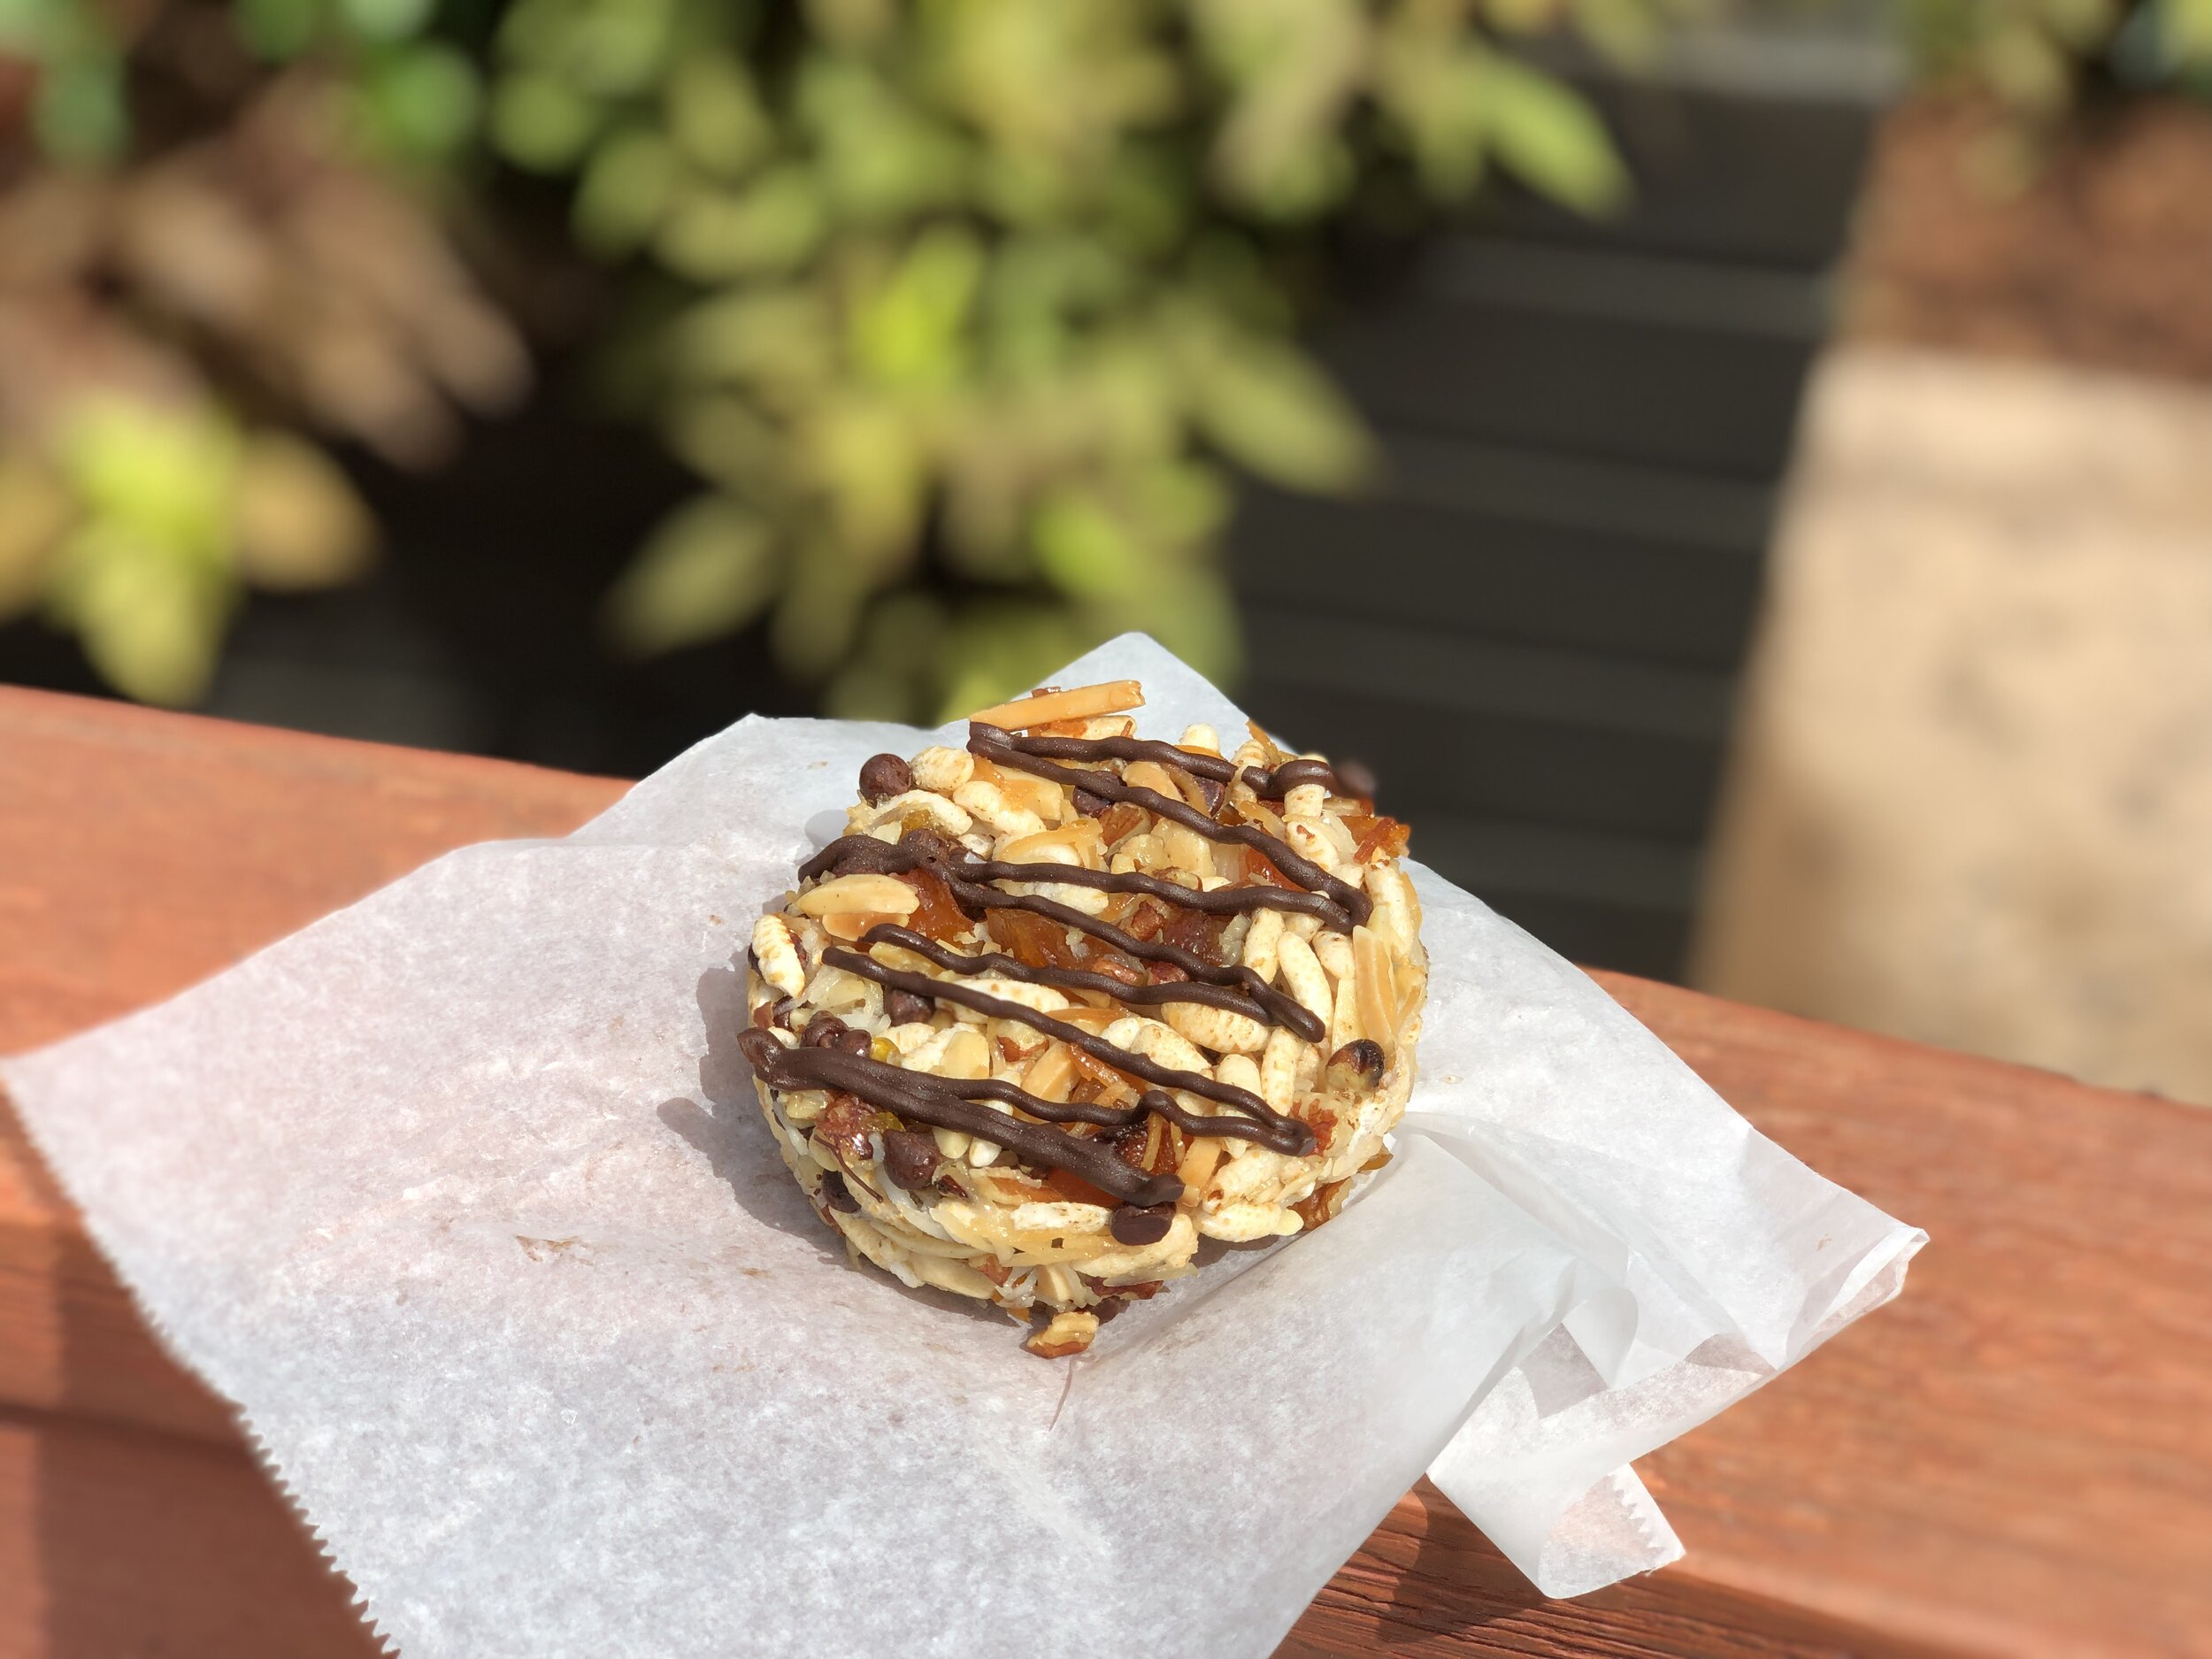 Fruit and Nut Energy Snack - 2019 Epcot Food & Wine Festival